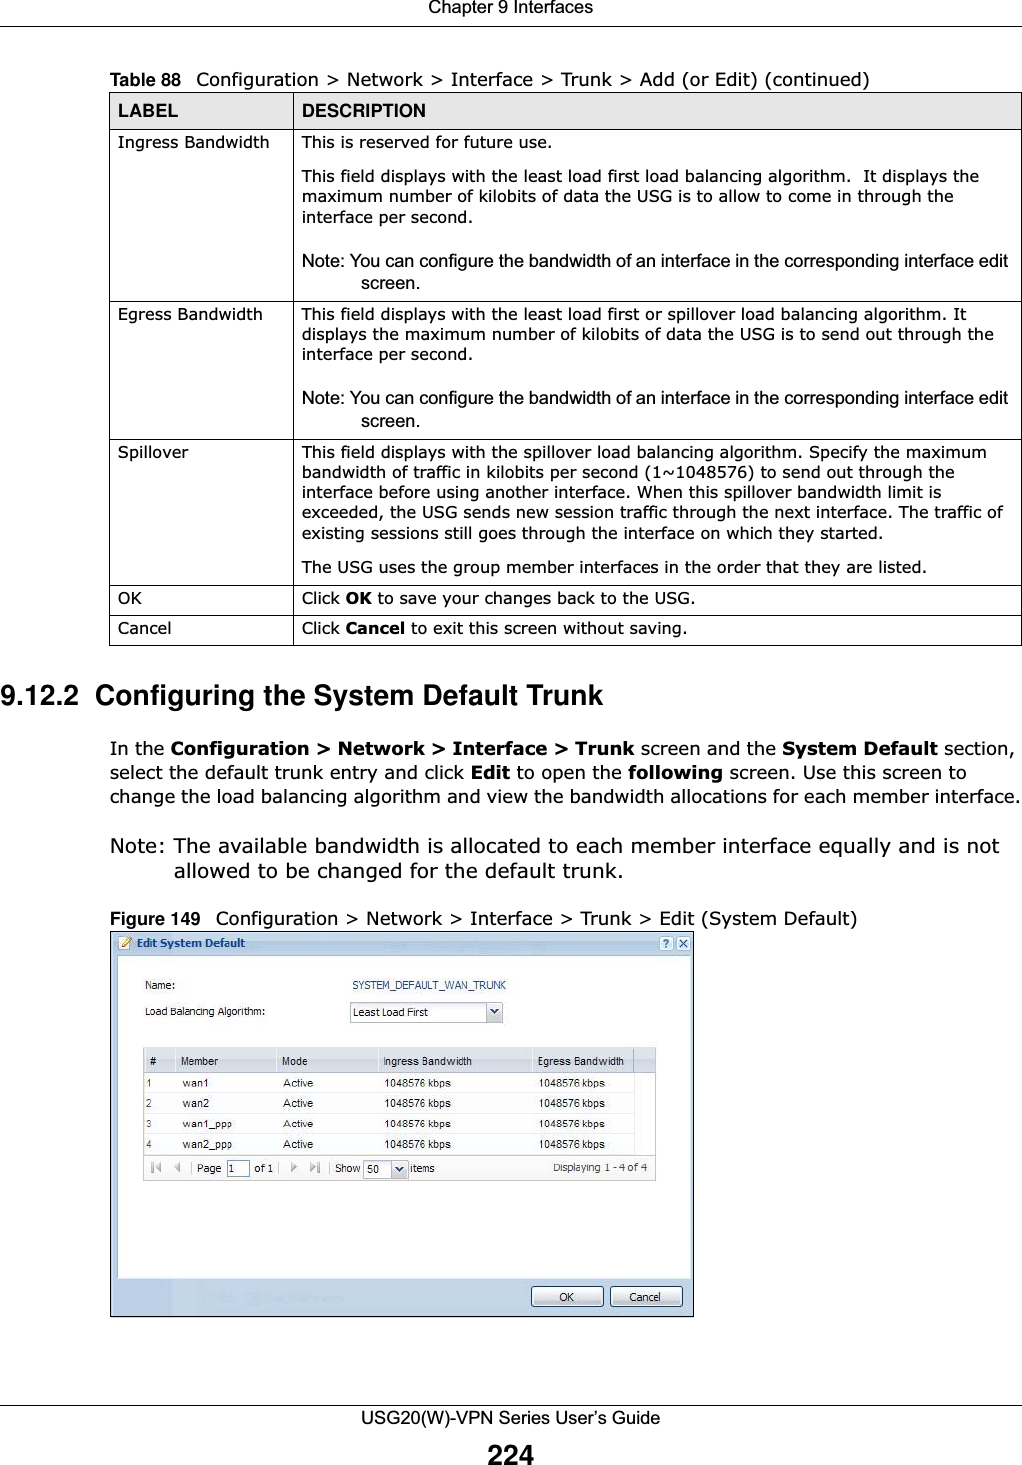 Chapter 9 InterfacesUSG20(W)-VPN Series User’s Guide2249.12.2  Configuring the System Default Trunk In the Configuration &gt; Network &gt; Interface &gt; Trunk screen and the System Default section, select the default trunk entry and click Edit to open the following screen. Use this screen to change the load balancing algorithm and view the bandwidth allocations for each member interface.Note: The available bandwidth is allocated to each member interface equally and is not allowed to be changed for the default trunk. Figure 149   Configuration &gt; Network &gt; Interface &gt; Trunk &gt; Edit (System Default)    Ingress Bandwidth This is reserved for future use.This field displays with the least load first load balancing algorithm.  It displays the maximum number of kilobits of data the USG is to allow to come in through the interface per second. Note: You can configure the bandwidth of an interface in the corresponding interface edit screen.Egress Bandwidth This field displays with the least load first or spillover load balancing algorithm. It displays the maximum number of kilobits of data the USG is to send out through the interface per second.Note: You can configure the bandwidth of an interface in the corresponding interface edit screen.Spillover This field displays with the spillover load balancing algorithm. Specify the maximum bandwidth of traffic in kilobits per second (1~1048576) to send out through the interface before using another interface. When this spillover bandwidth limit is exceeded, the USG sends new session traffic through the next interface. The traffic of existing sessions still goes through the interface on which they started.The USG uses the group member interfaces in the order that they are listed. OK Click OK to save your changes back to the USG.Cancel Click Cancel to exit this screen without saving.Table 88   Configuration &gt; Network &gt; Interface &gt; Trunk &gt; Add (or Edit) (continued)LABEL DESCRIPTION